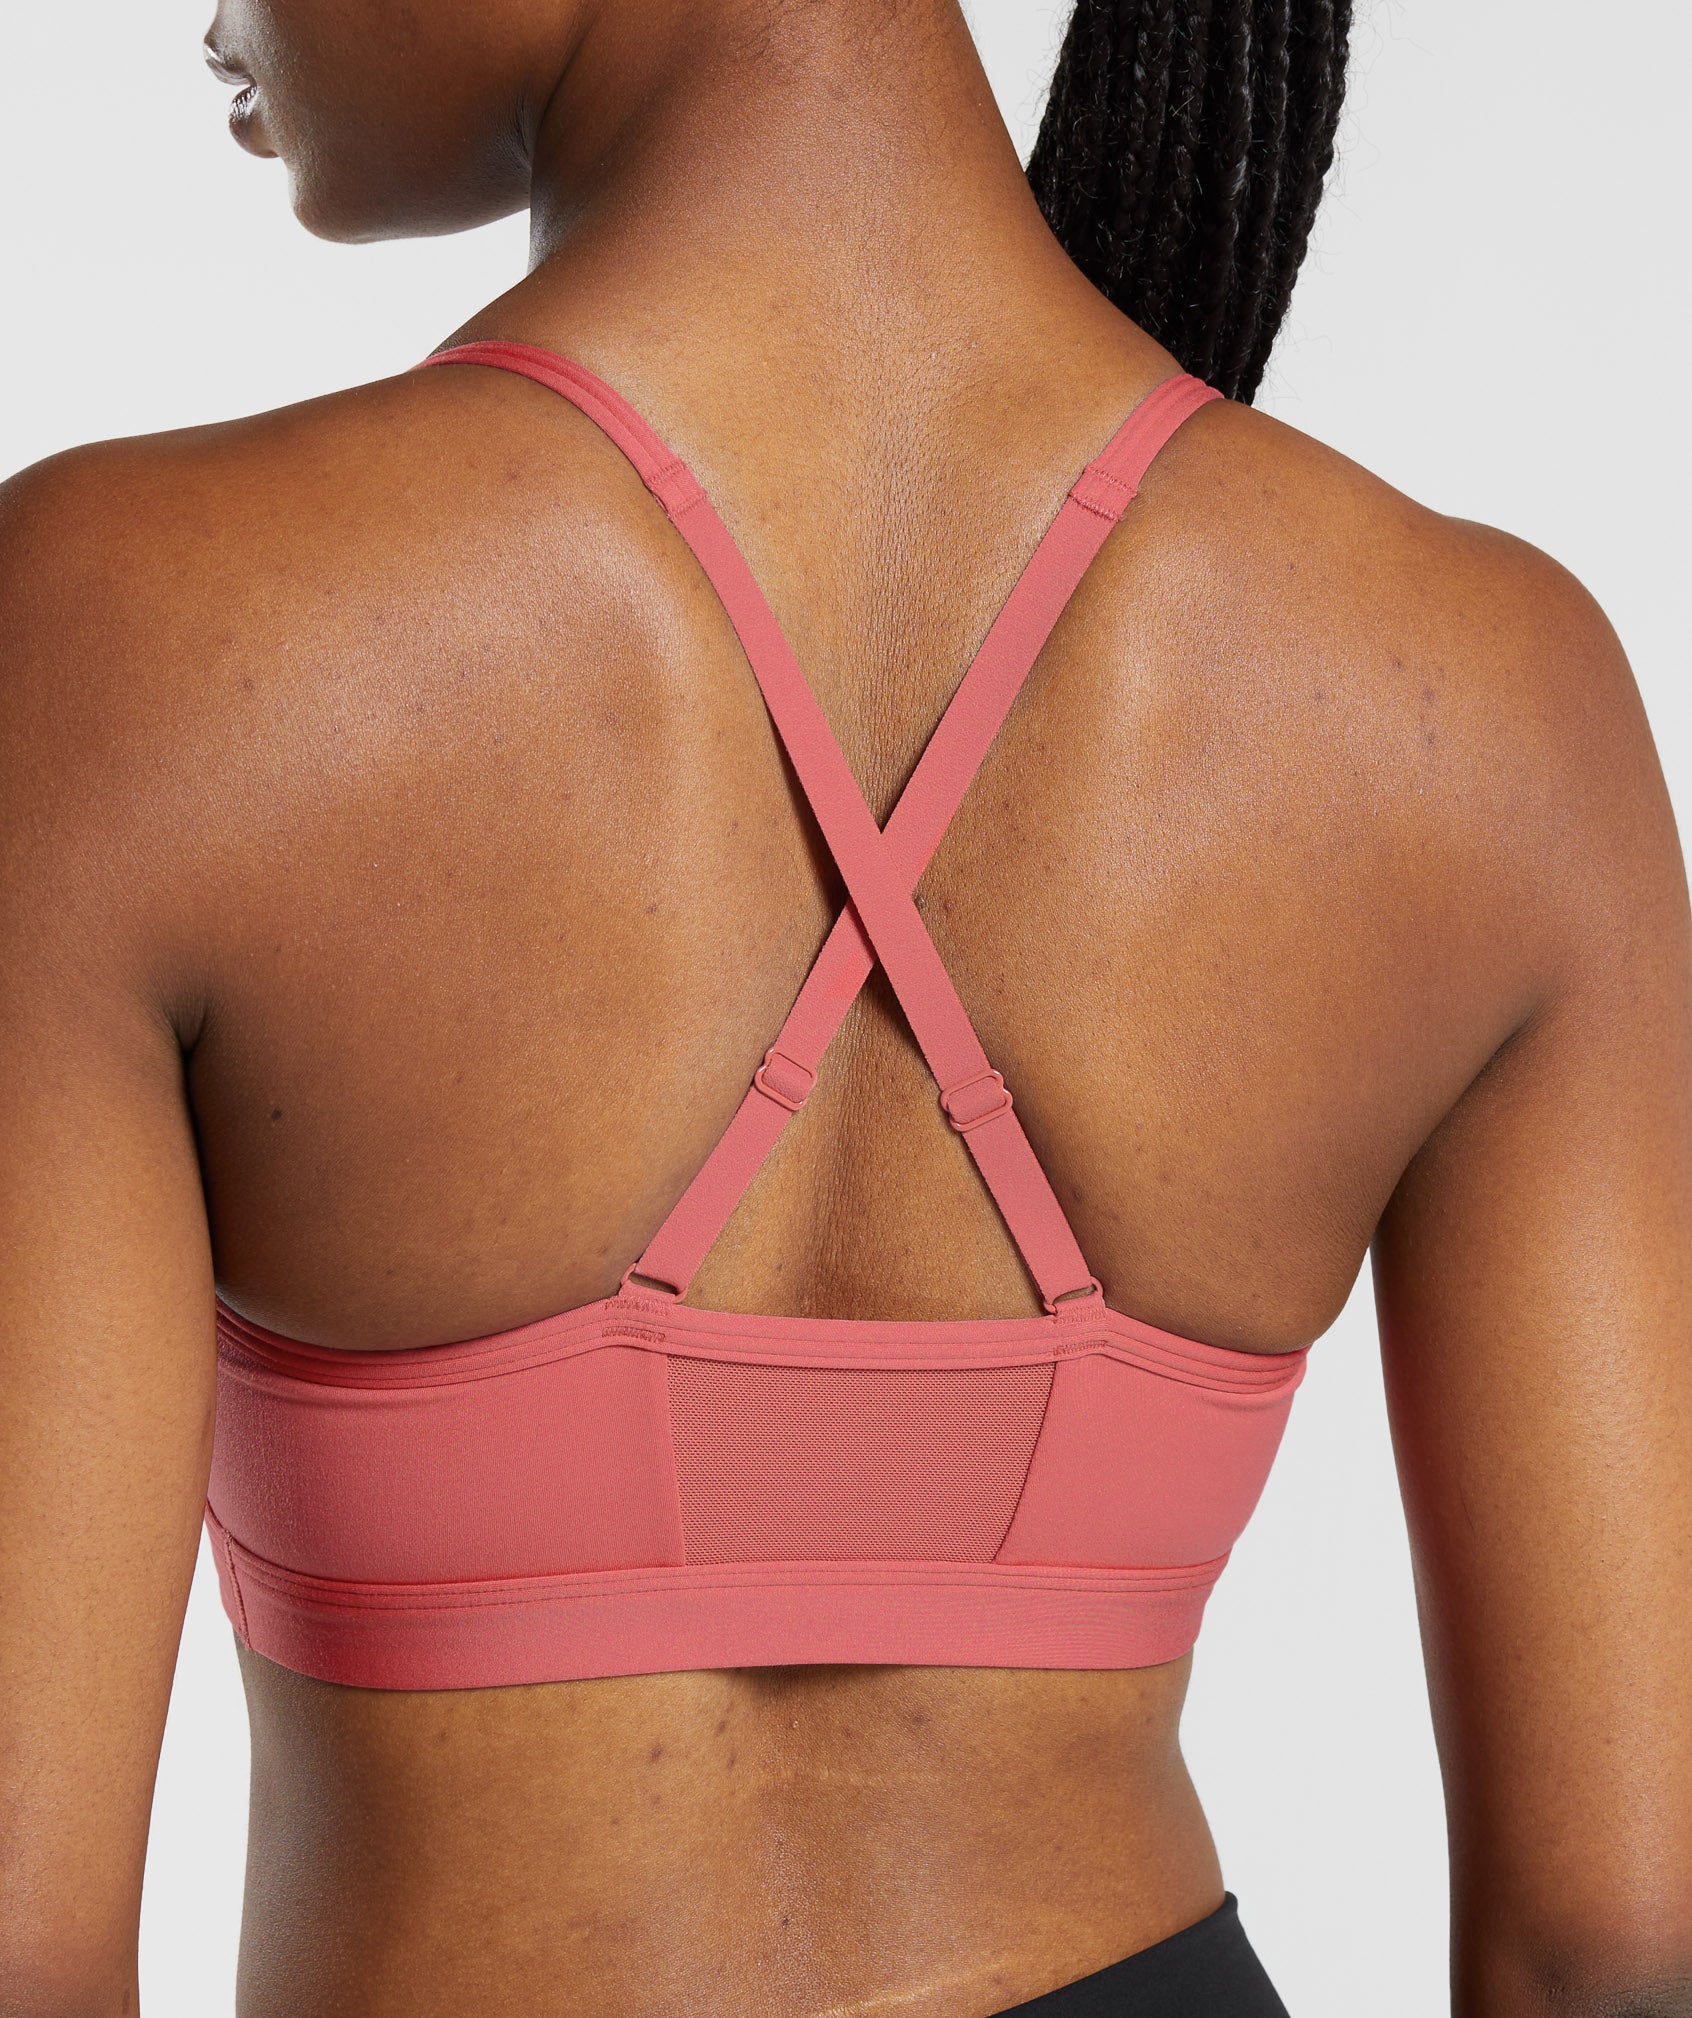 Gymshark Ruched Strappy Sports Bra - Classic Pink  Sports bra, Strappy  sports bras, Women's sports bras